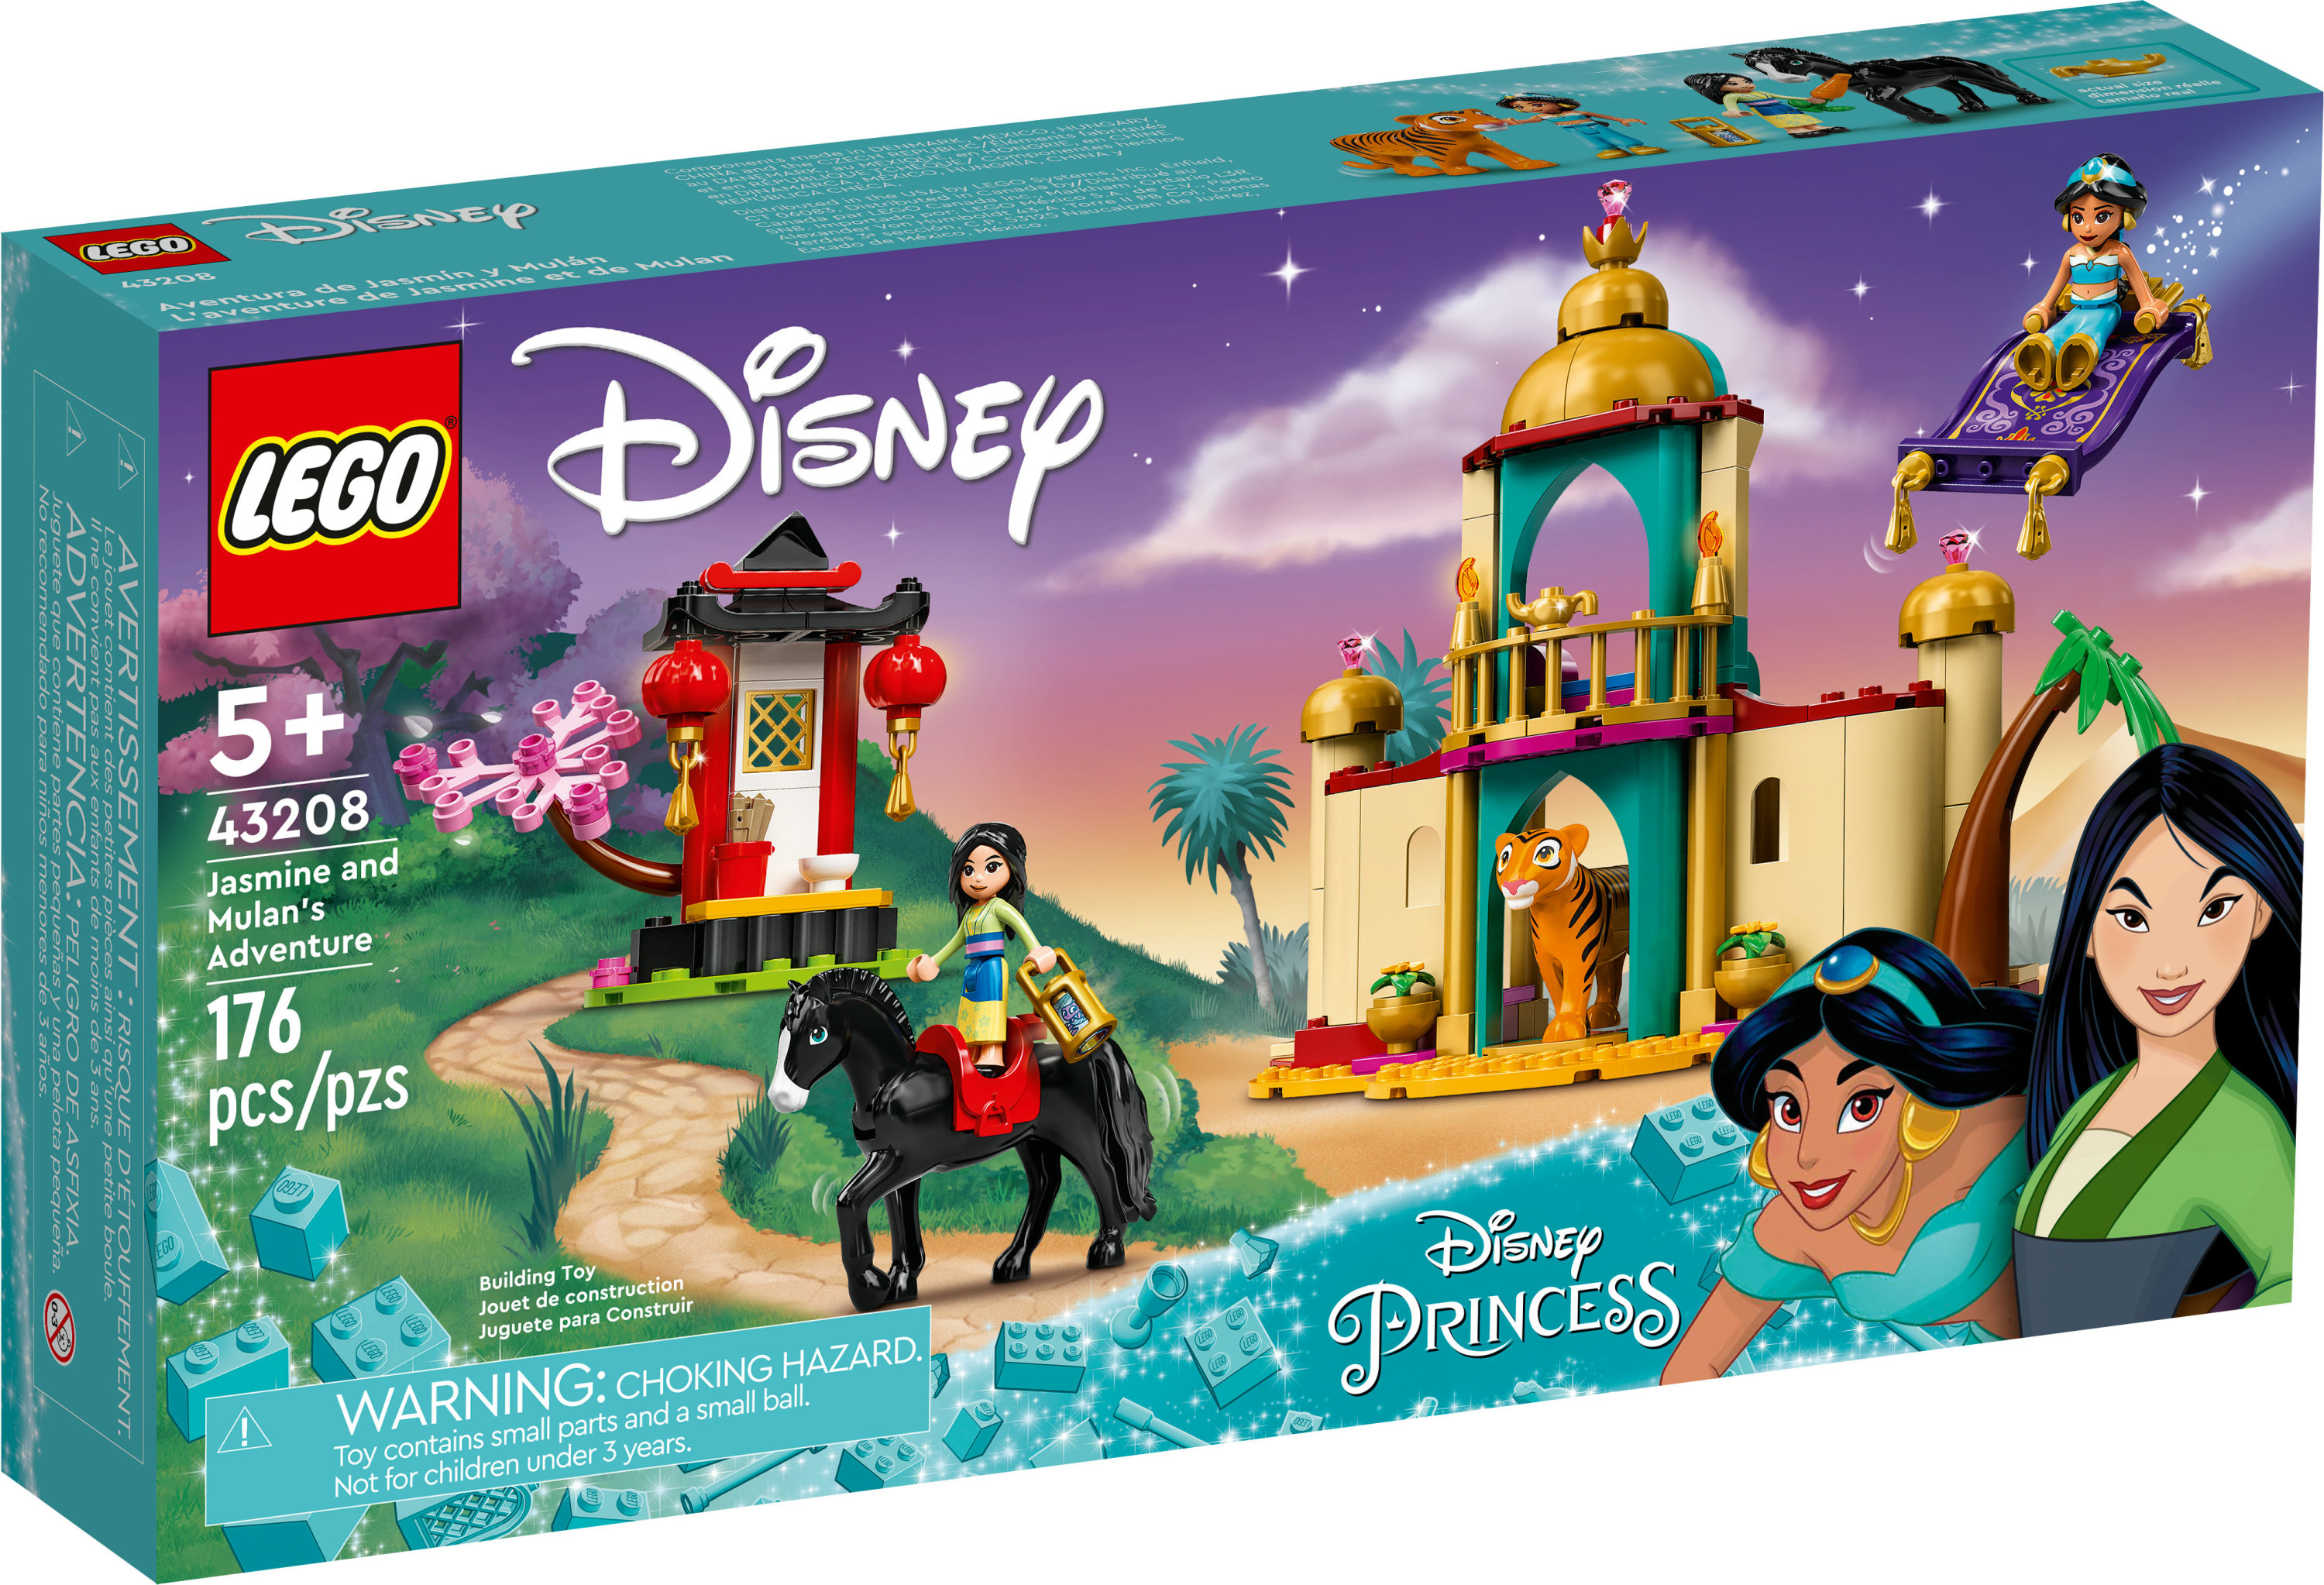 LEGO Disney Princess Jasmine and Mulan’s Adventure 43208 Palace Set,  Aladdin & Mulan Buildable Toy with Horse and Tiger Figures, Gifts for Kids, Girls & Boys - image 3 of 8